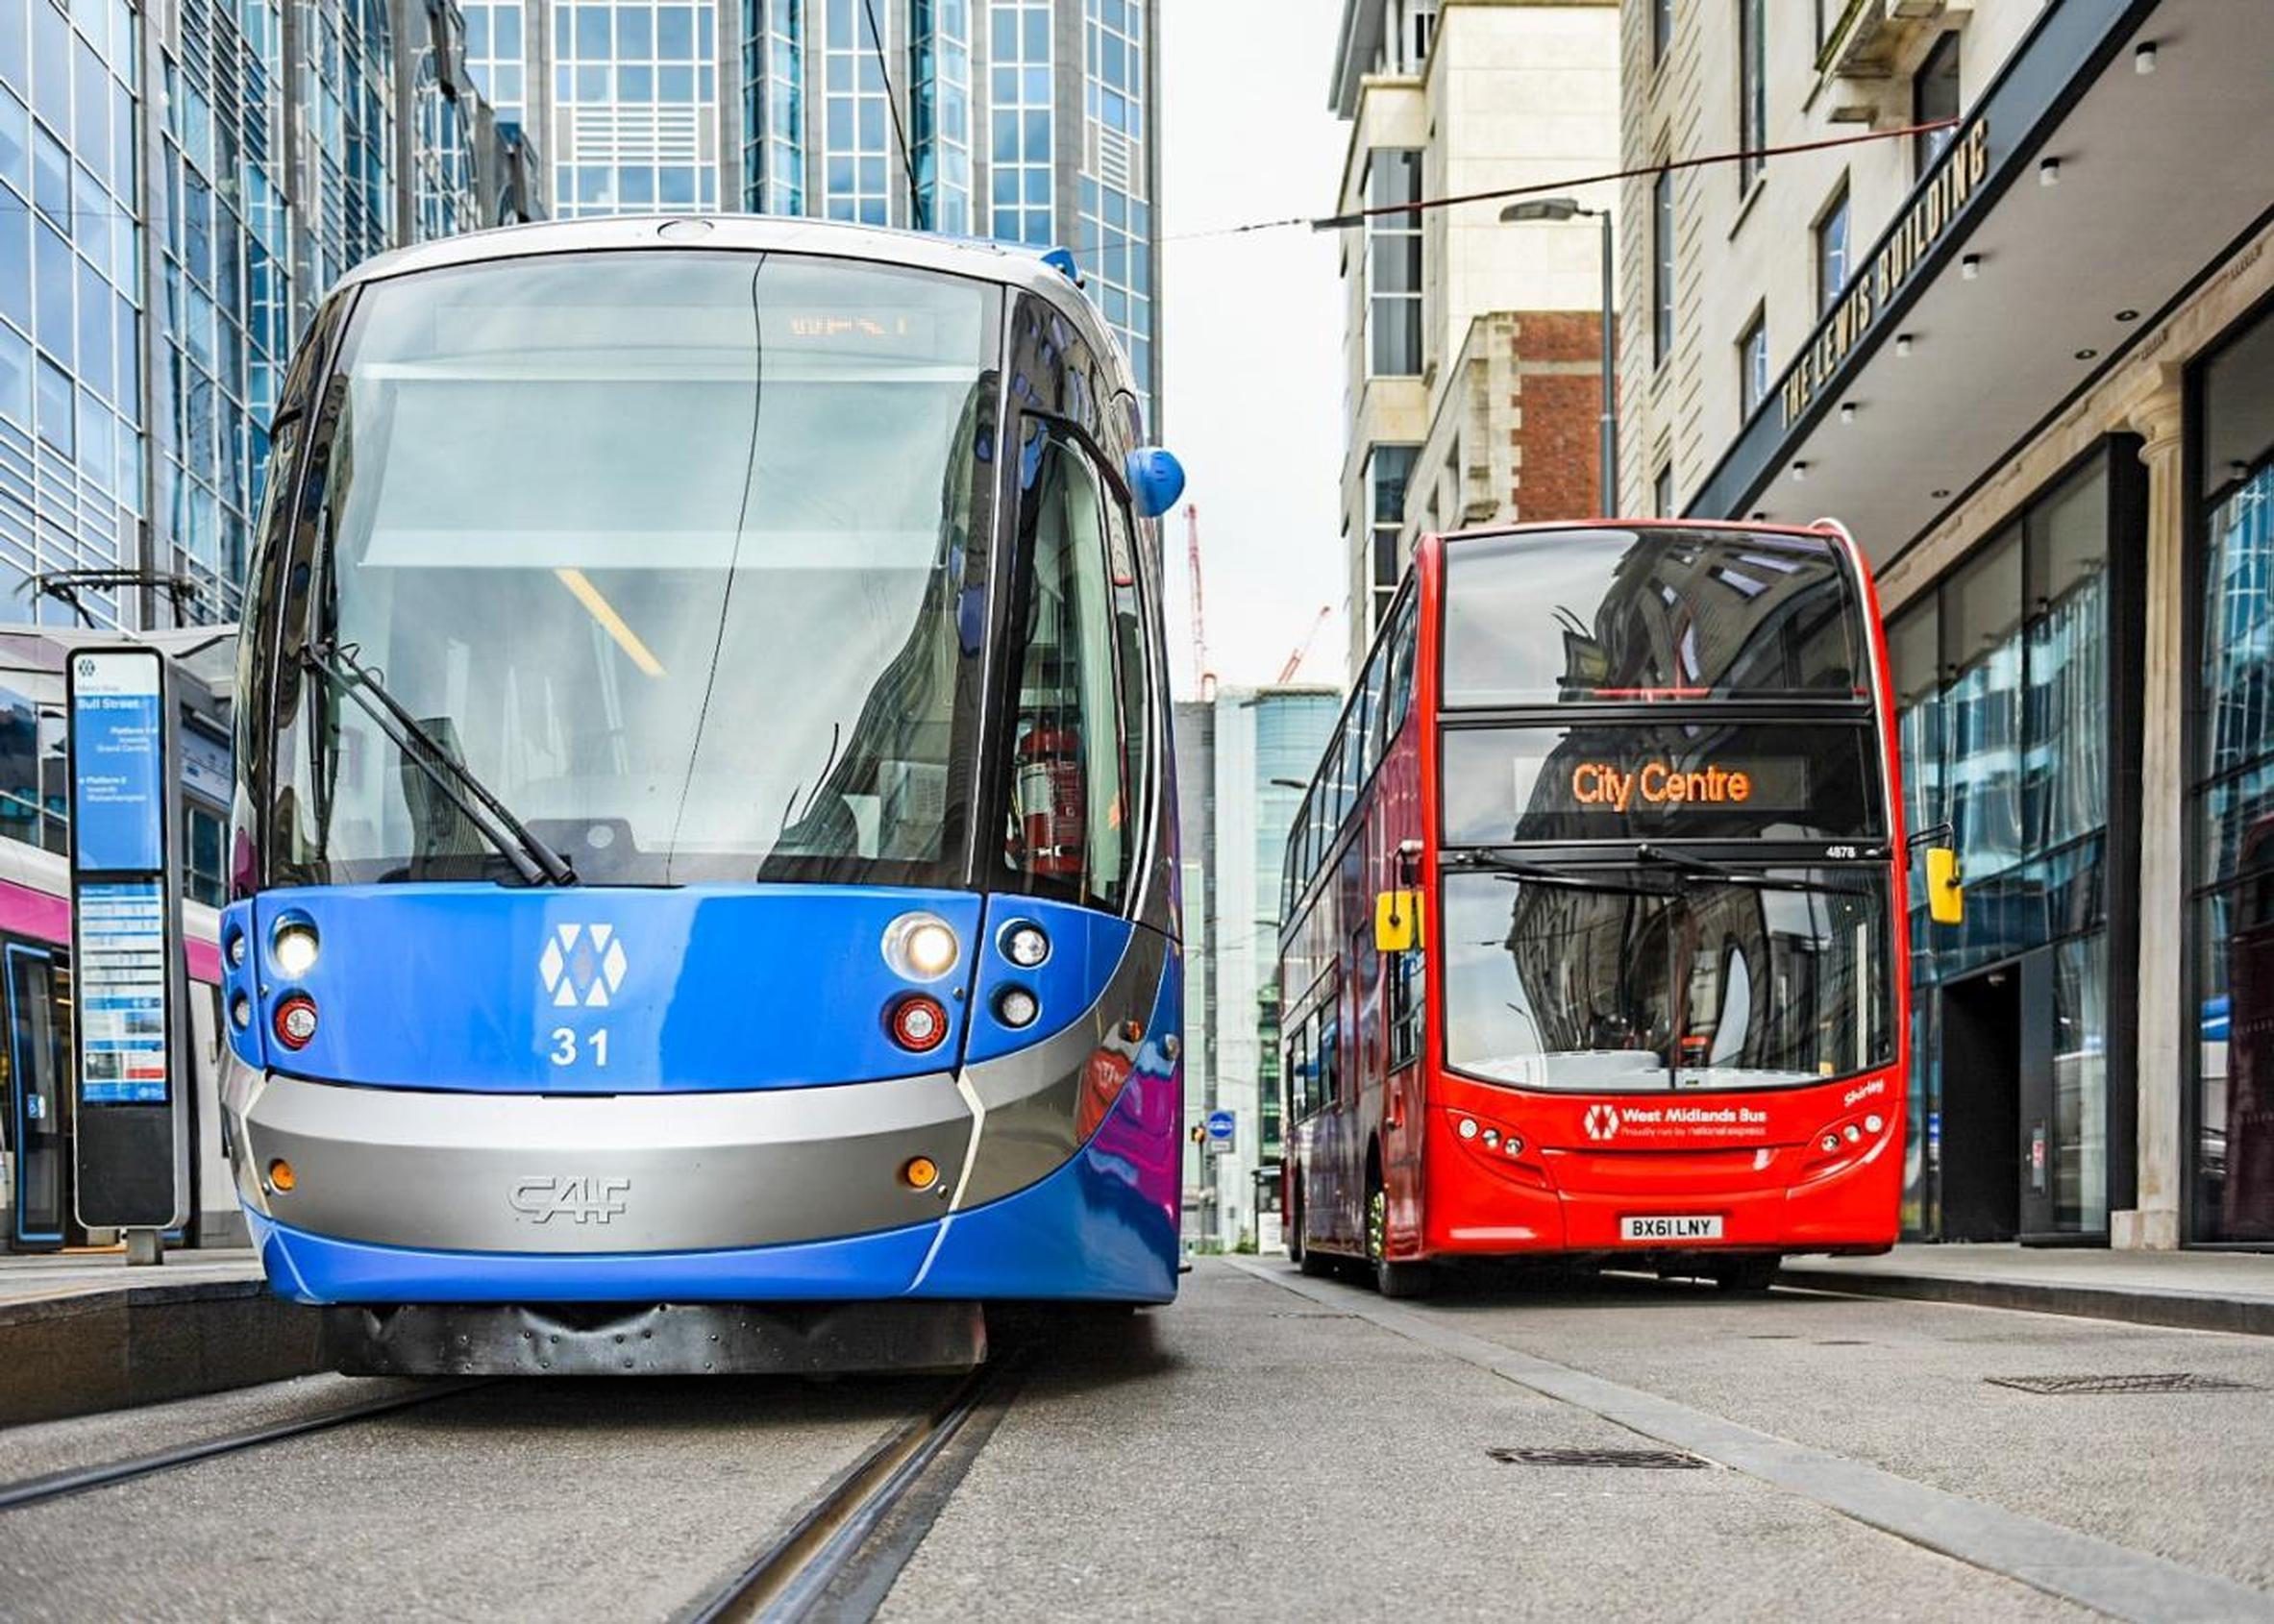 The funding will support improvements to the West Midlands’ tram, train, bus and cycle networks, as well as more EV charging points